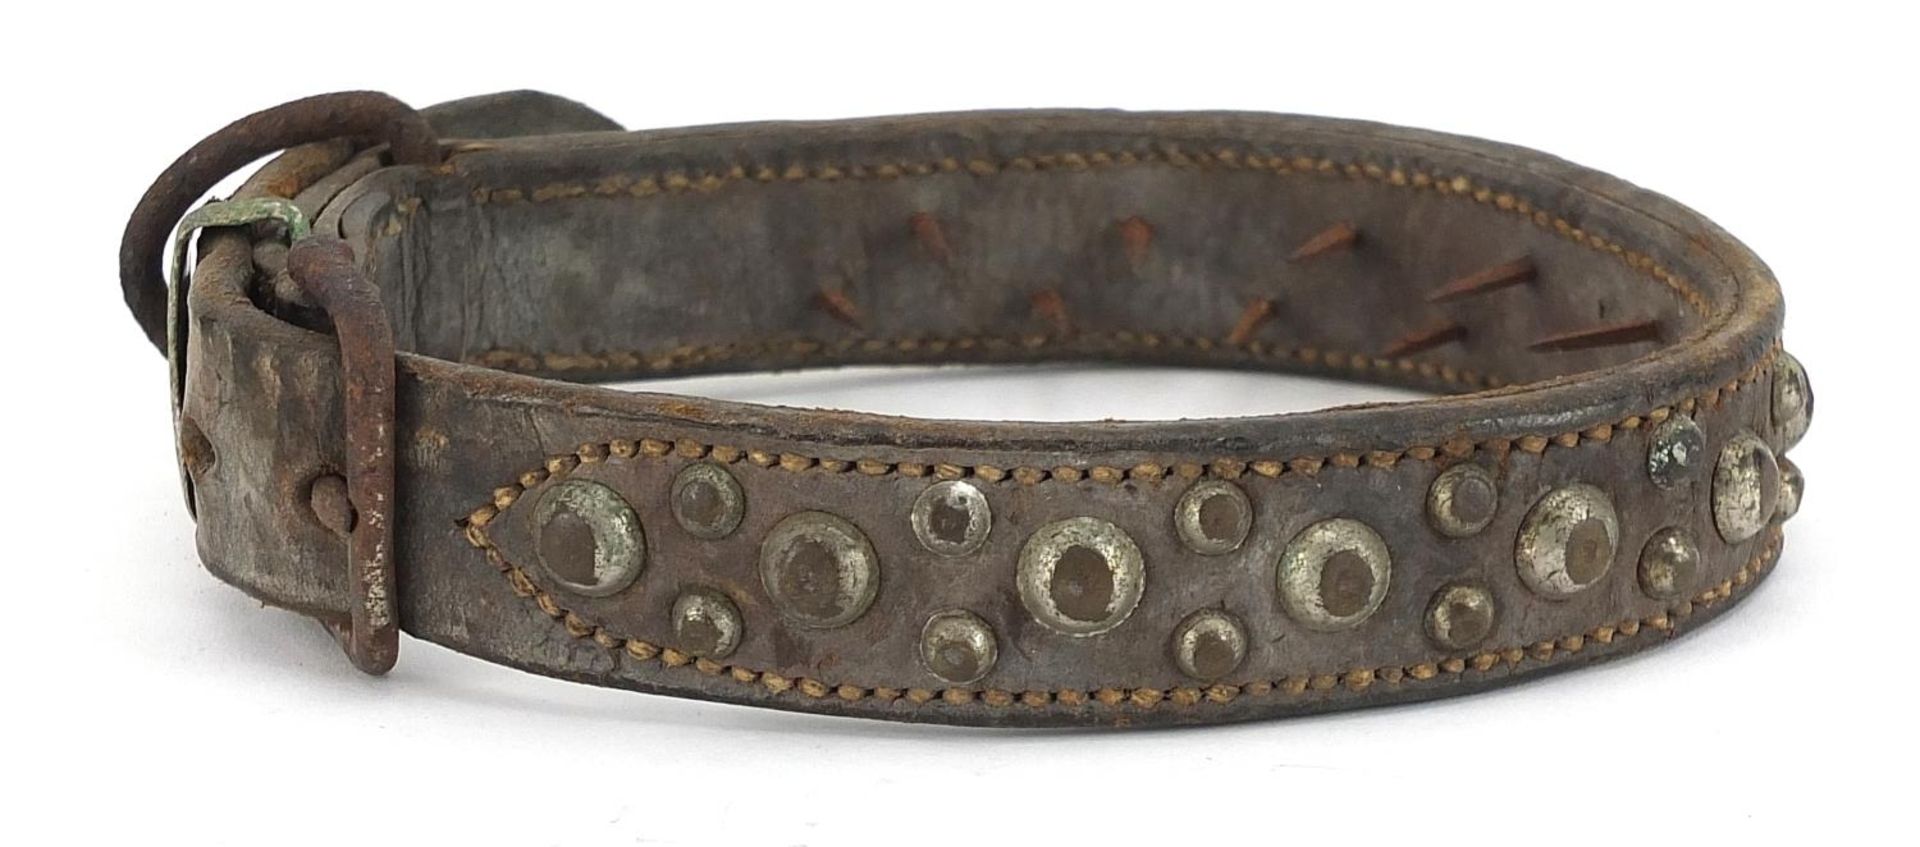 19th century spiked leather dog's collar